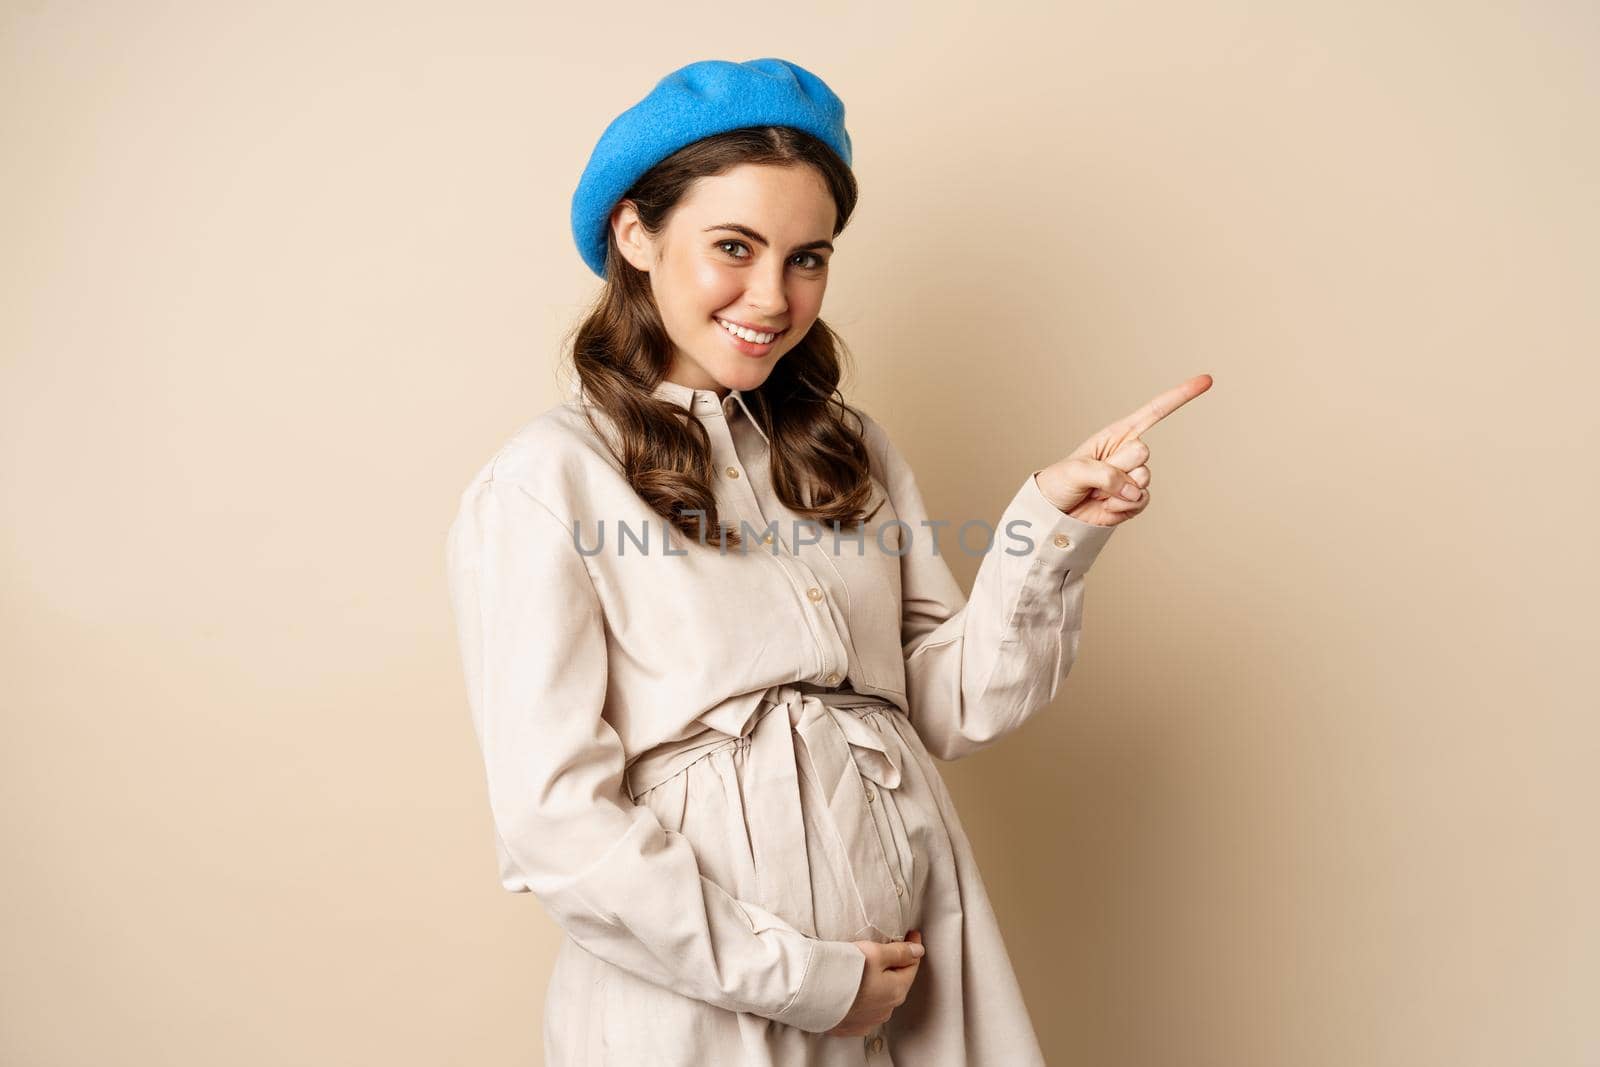 Young future mother, pregnant woman smiling, posing with big belly third trimester of pregnancy, looking happy, expecting baby, pointing right at logo, banner or advertisement.